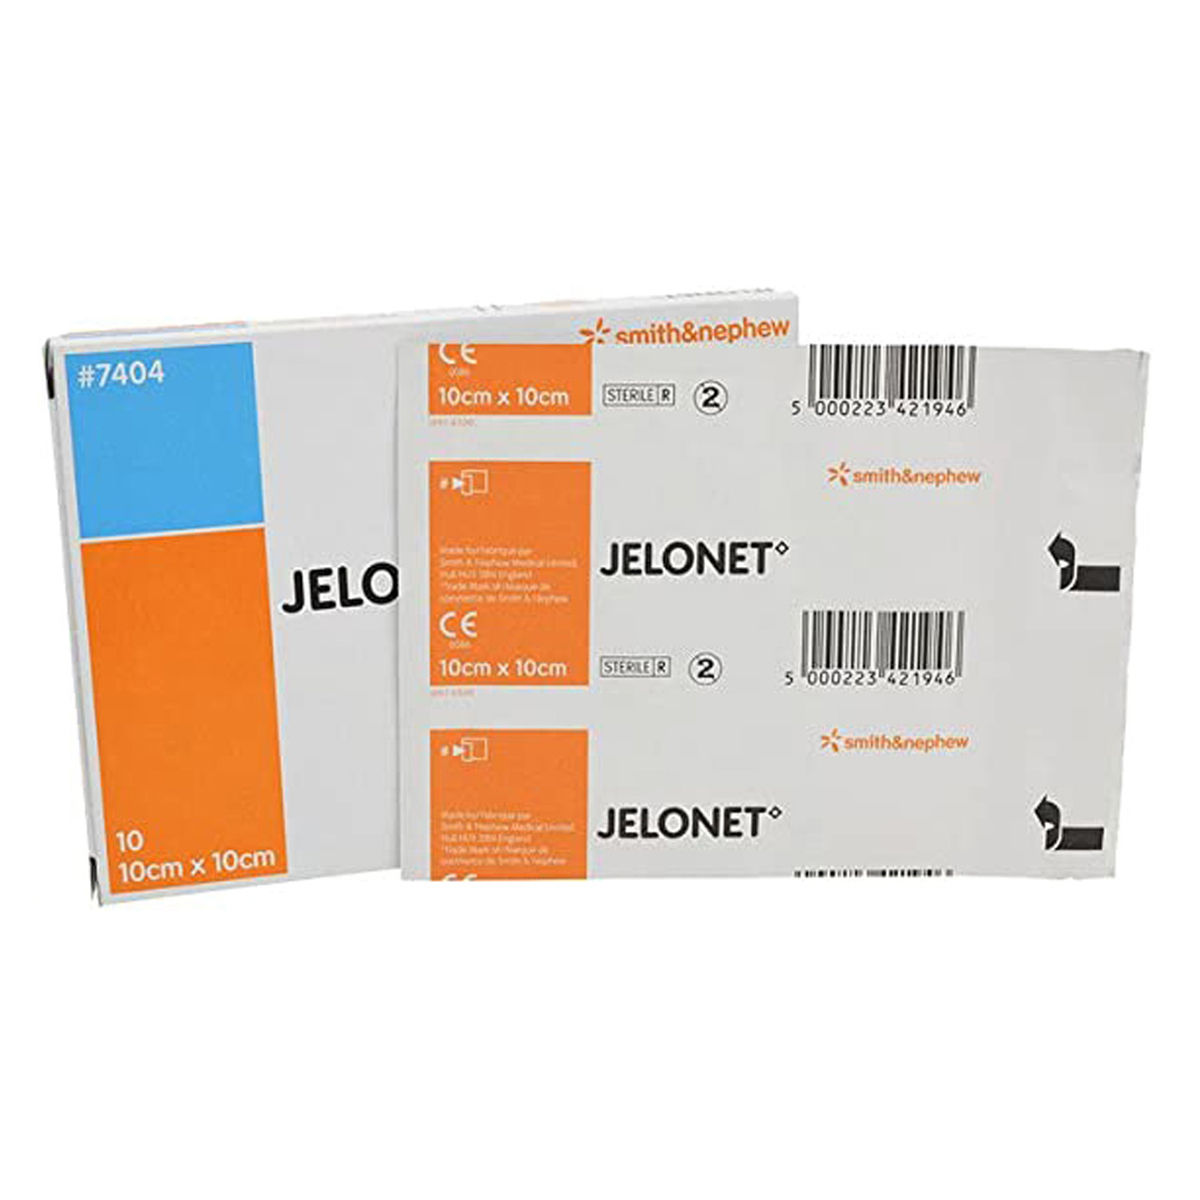 Jelonet 10 cm x 10 cm Paraffin Gauze, 1 Count, Pack of 1 